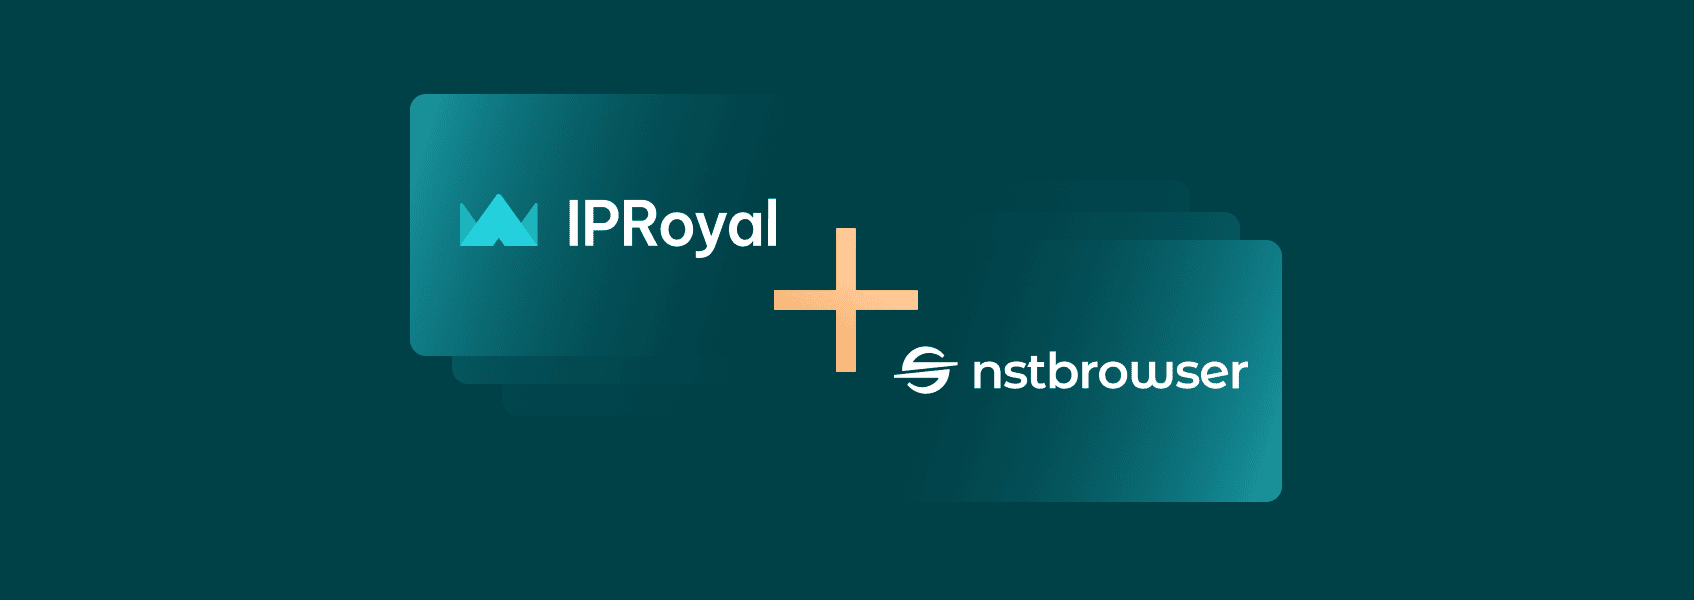 How to Set Up a Nstbrowser Proxy With IPRoyal